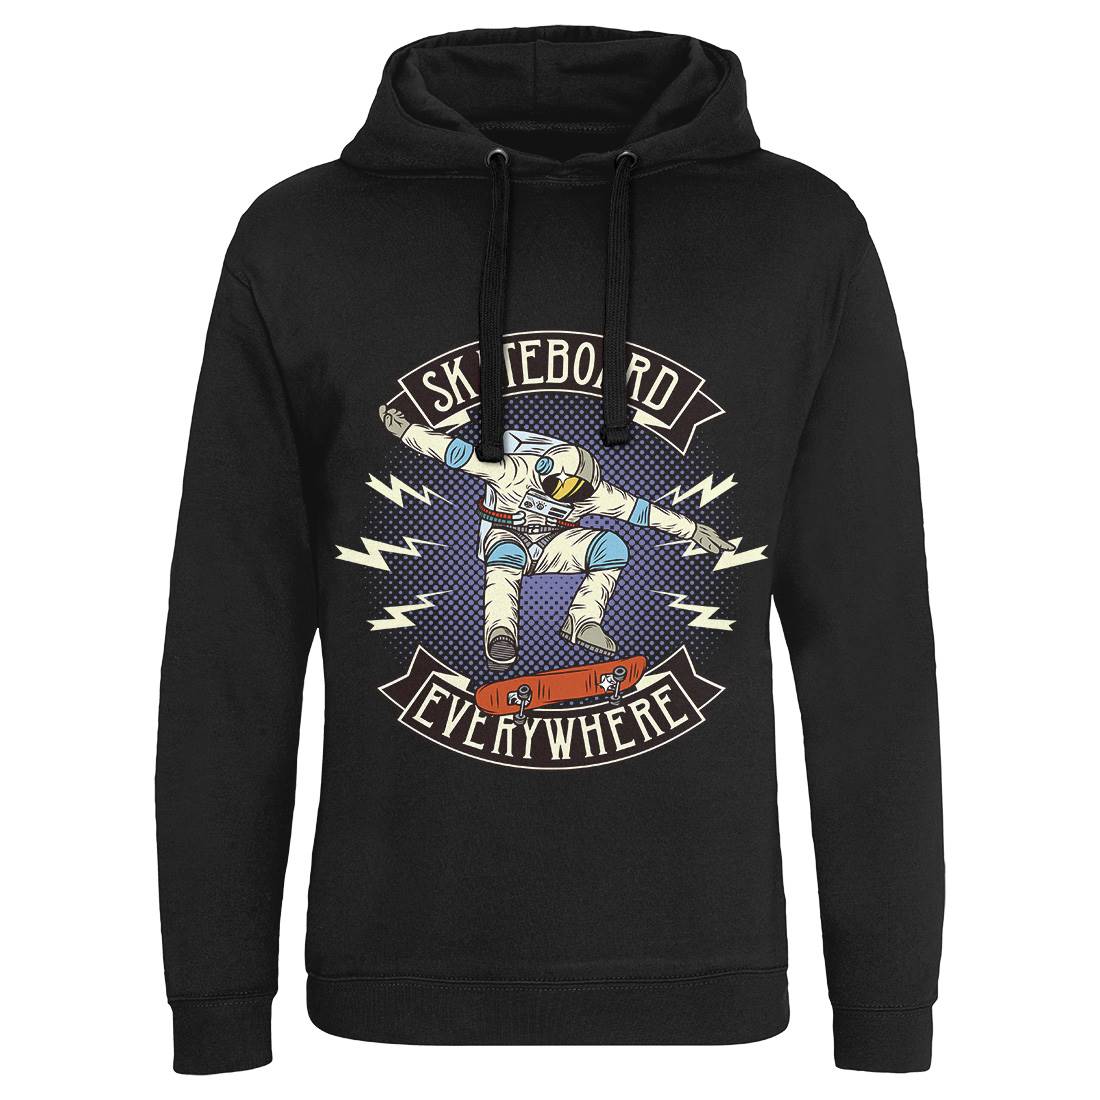 Skateboard Everywhere Mens Hoodie Without Pocket Skate D973